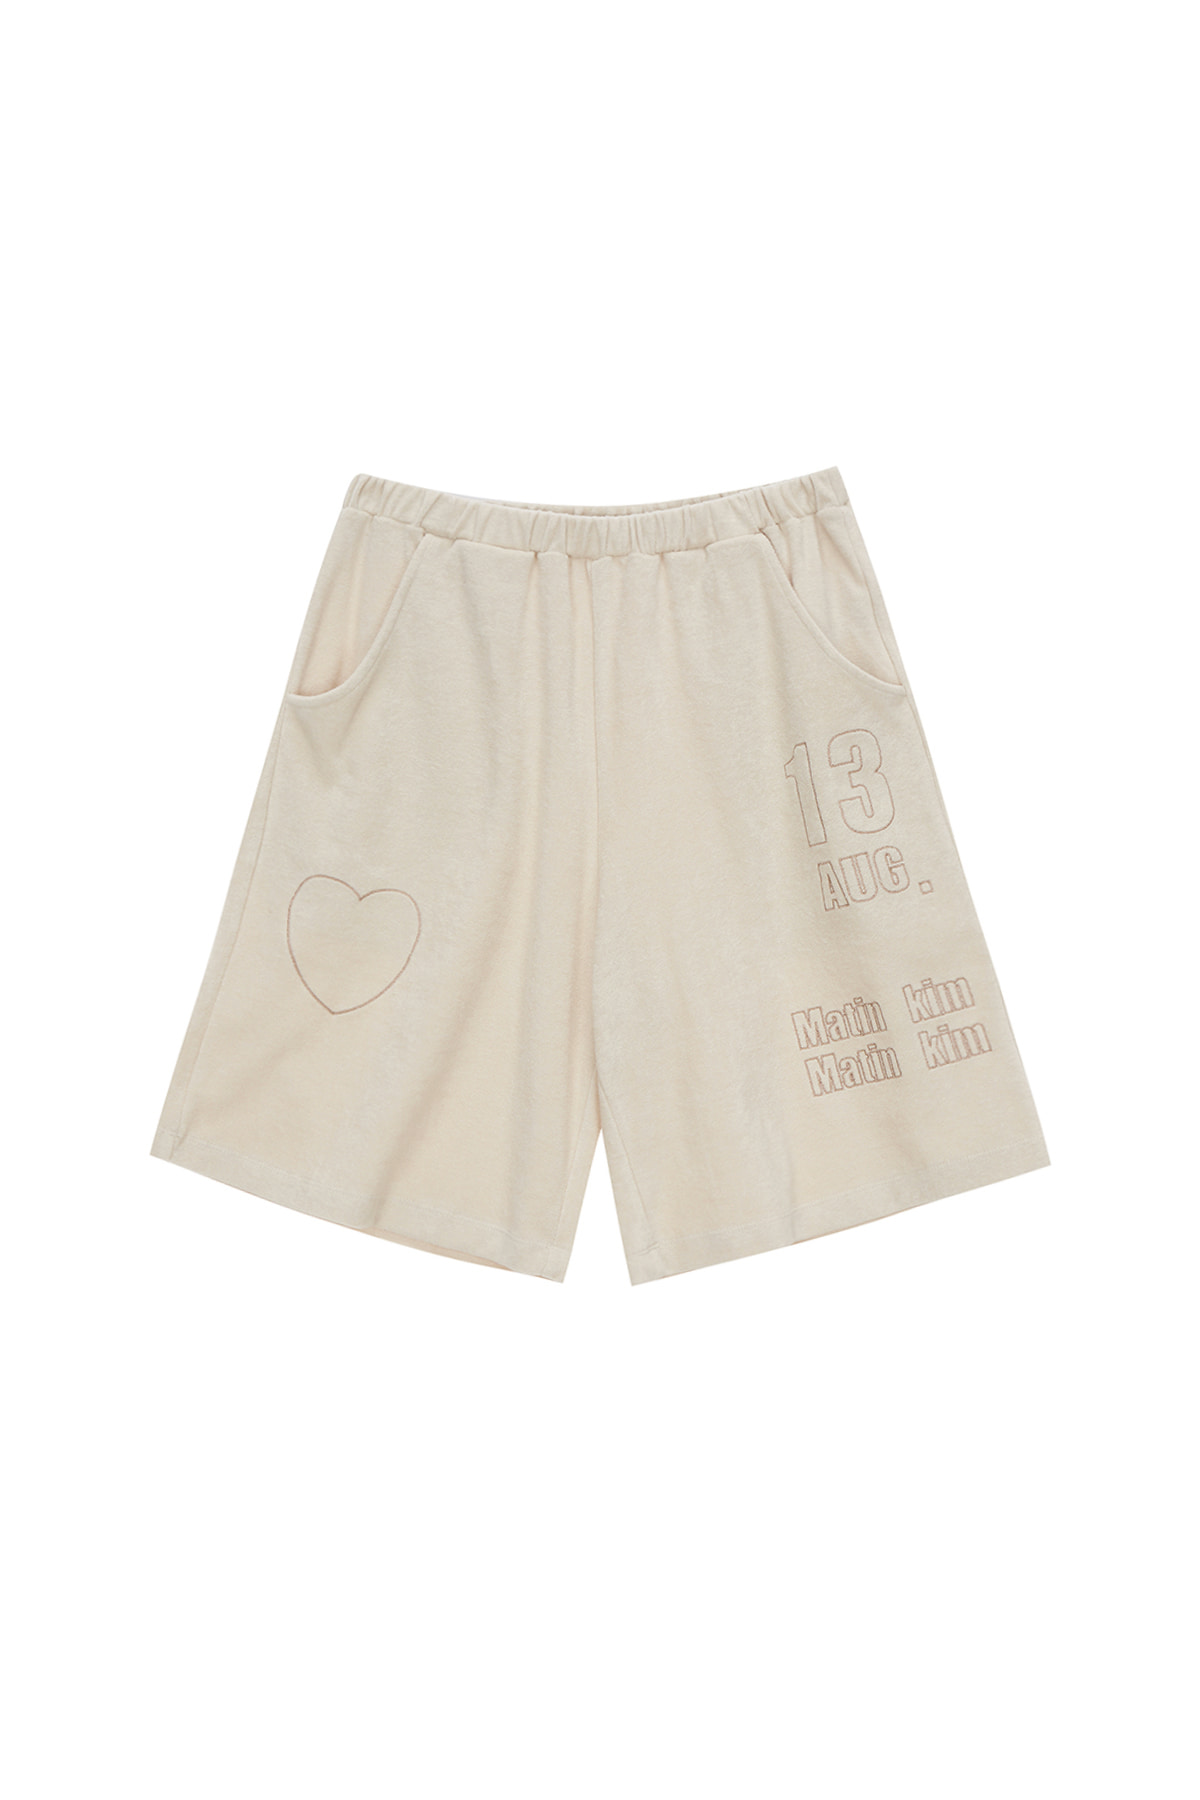 SOFT TOUCH HALF PANTS IN IVORY